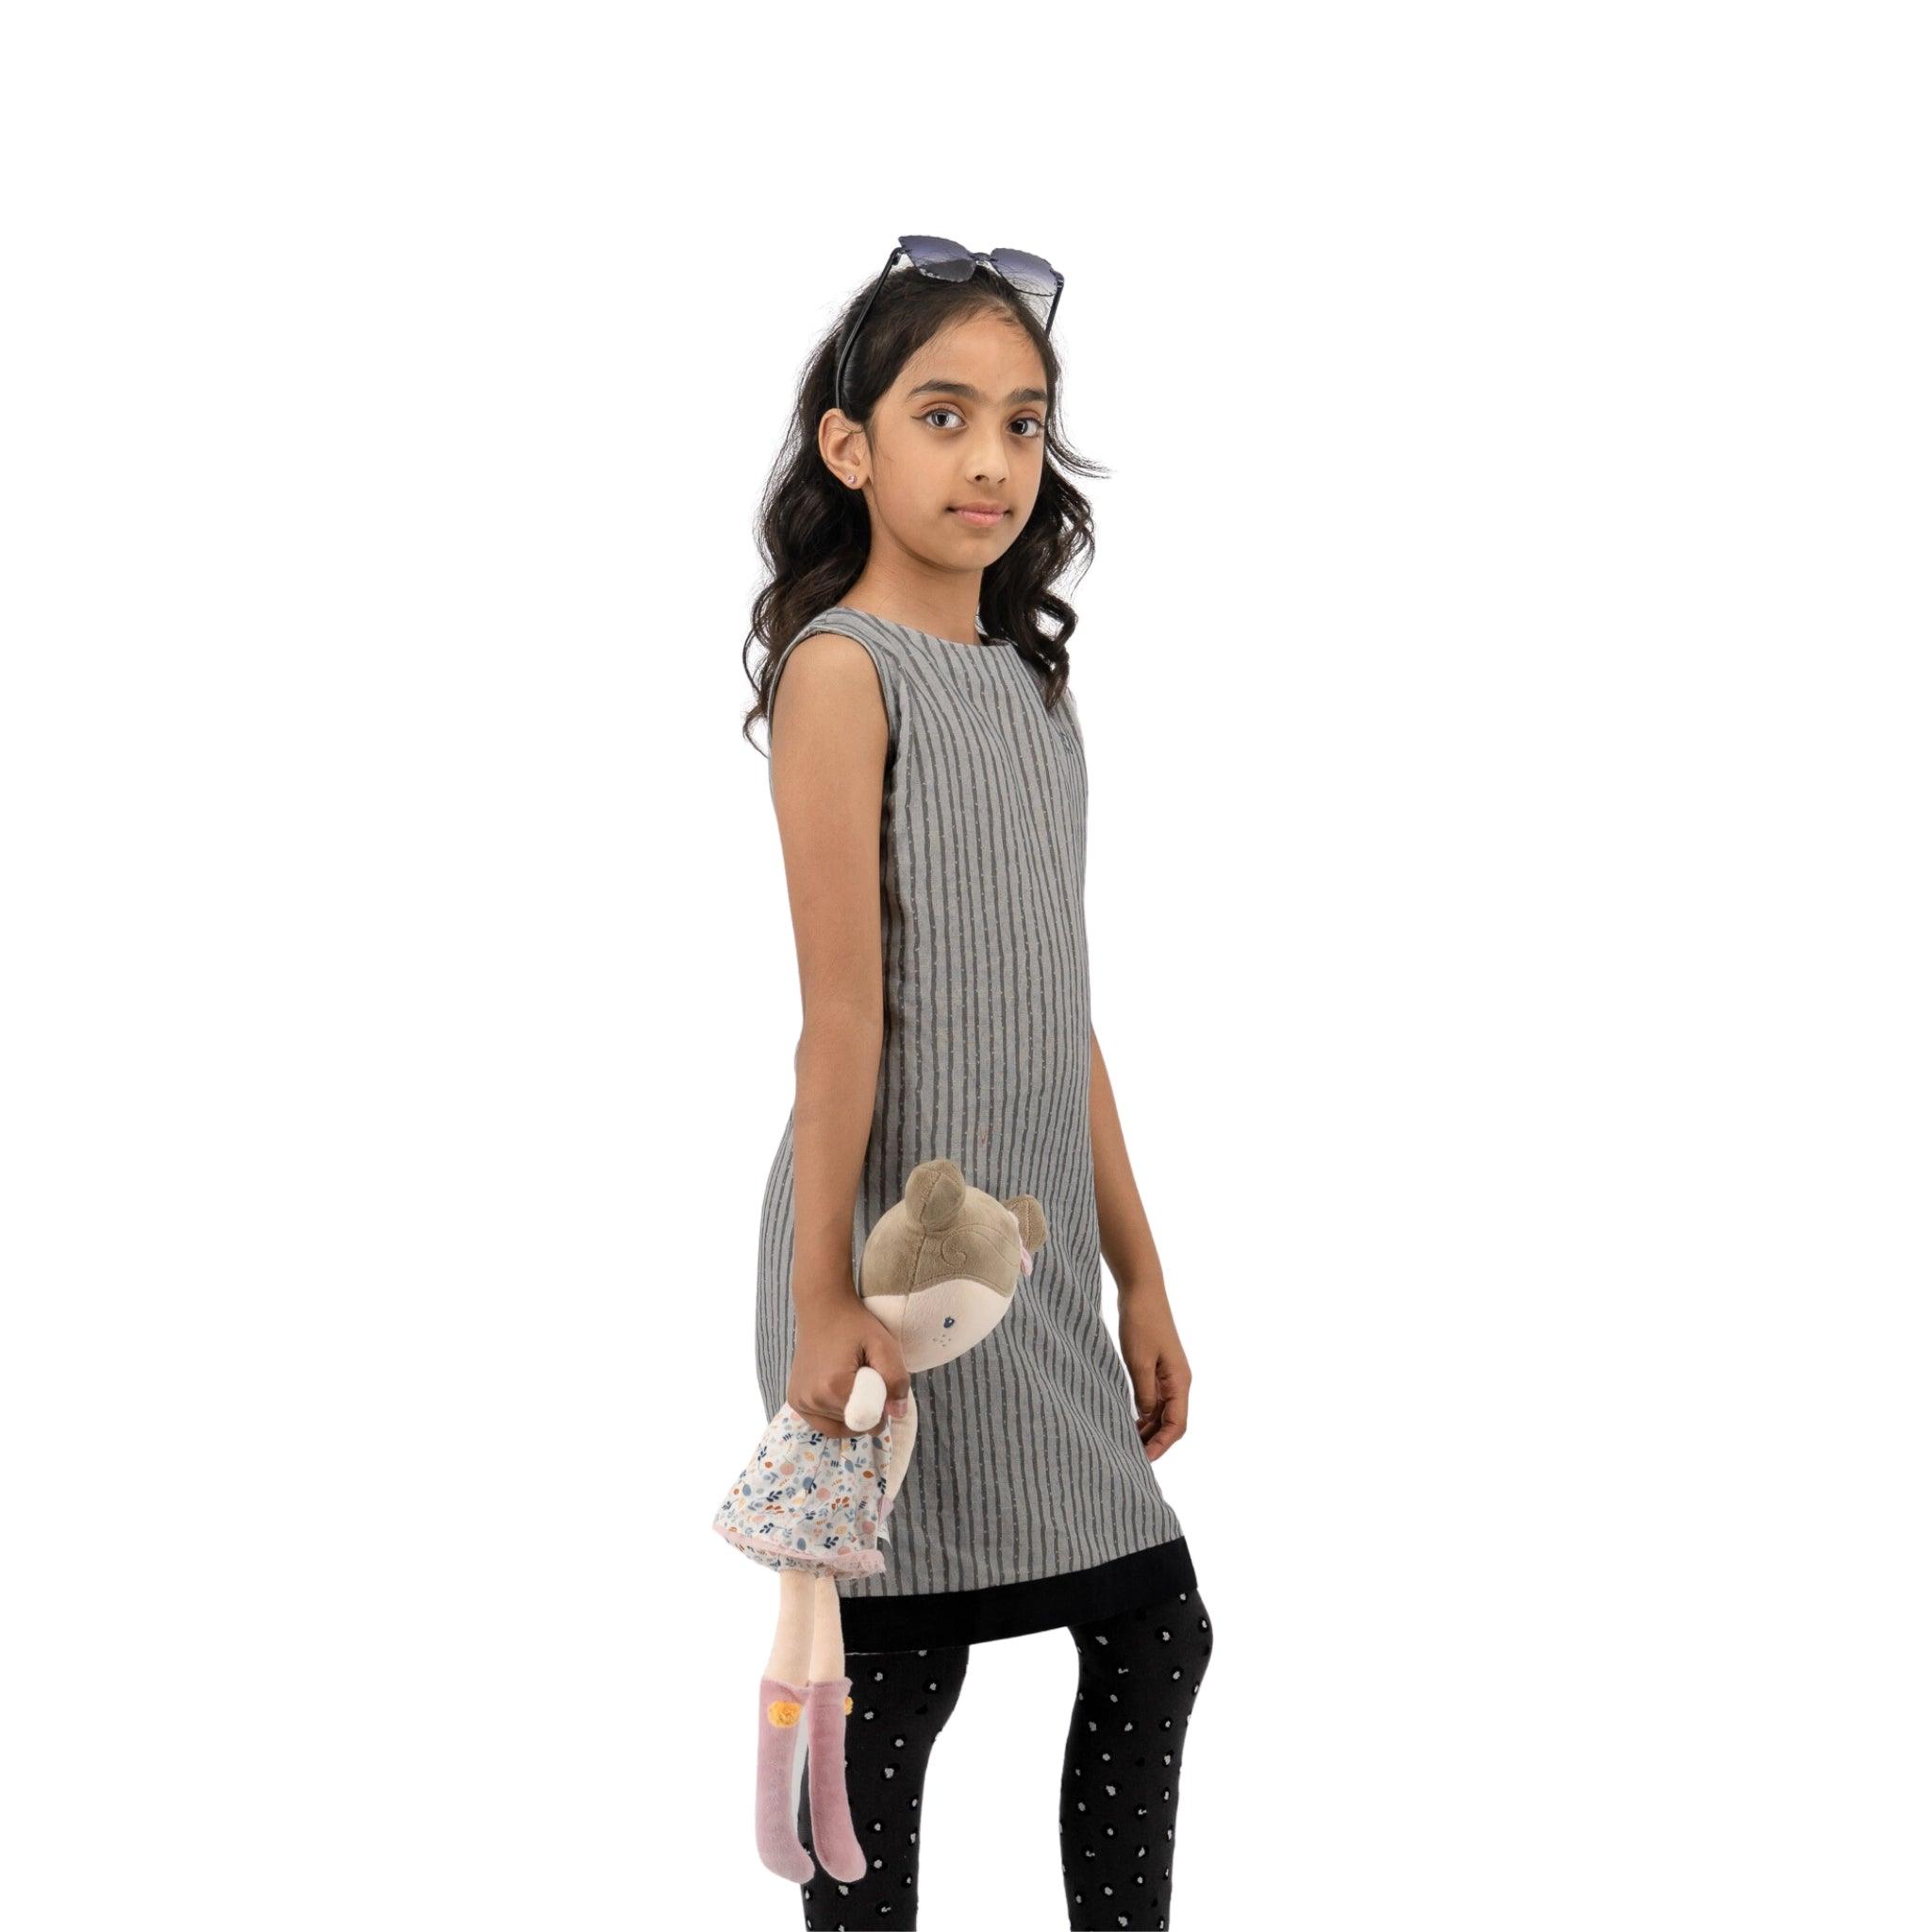 A young girl with sunglasses on her head, wearing a sleeveless Karee linen cotton round neck frock for kids in steel grey and leggings, walks while holding a stuffed toy.